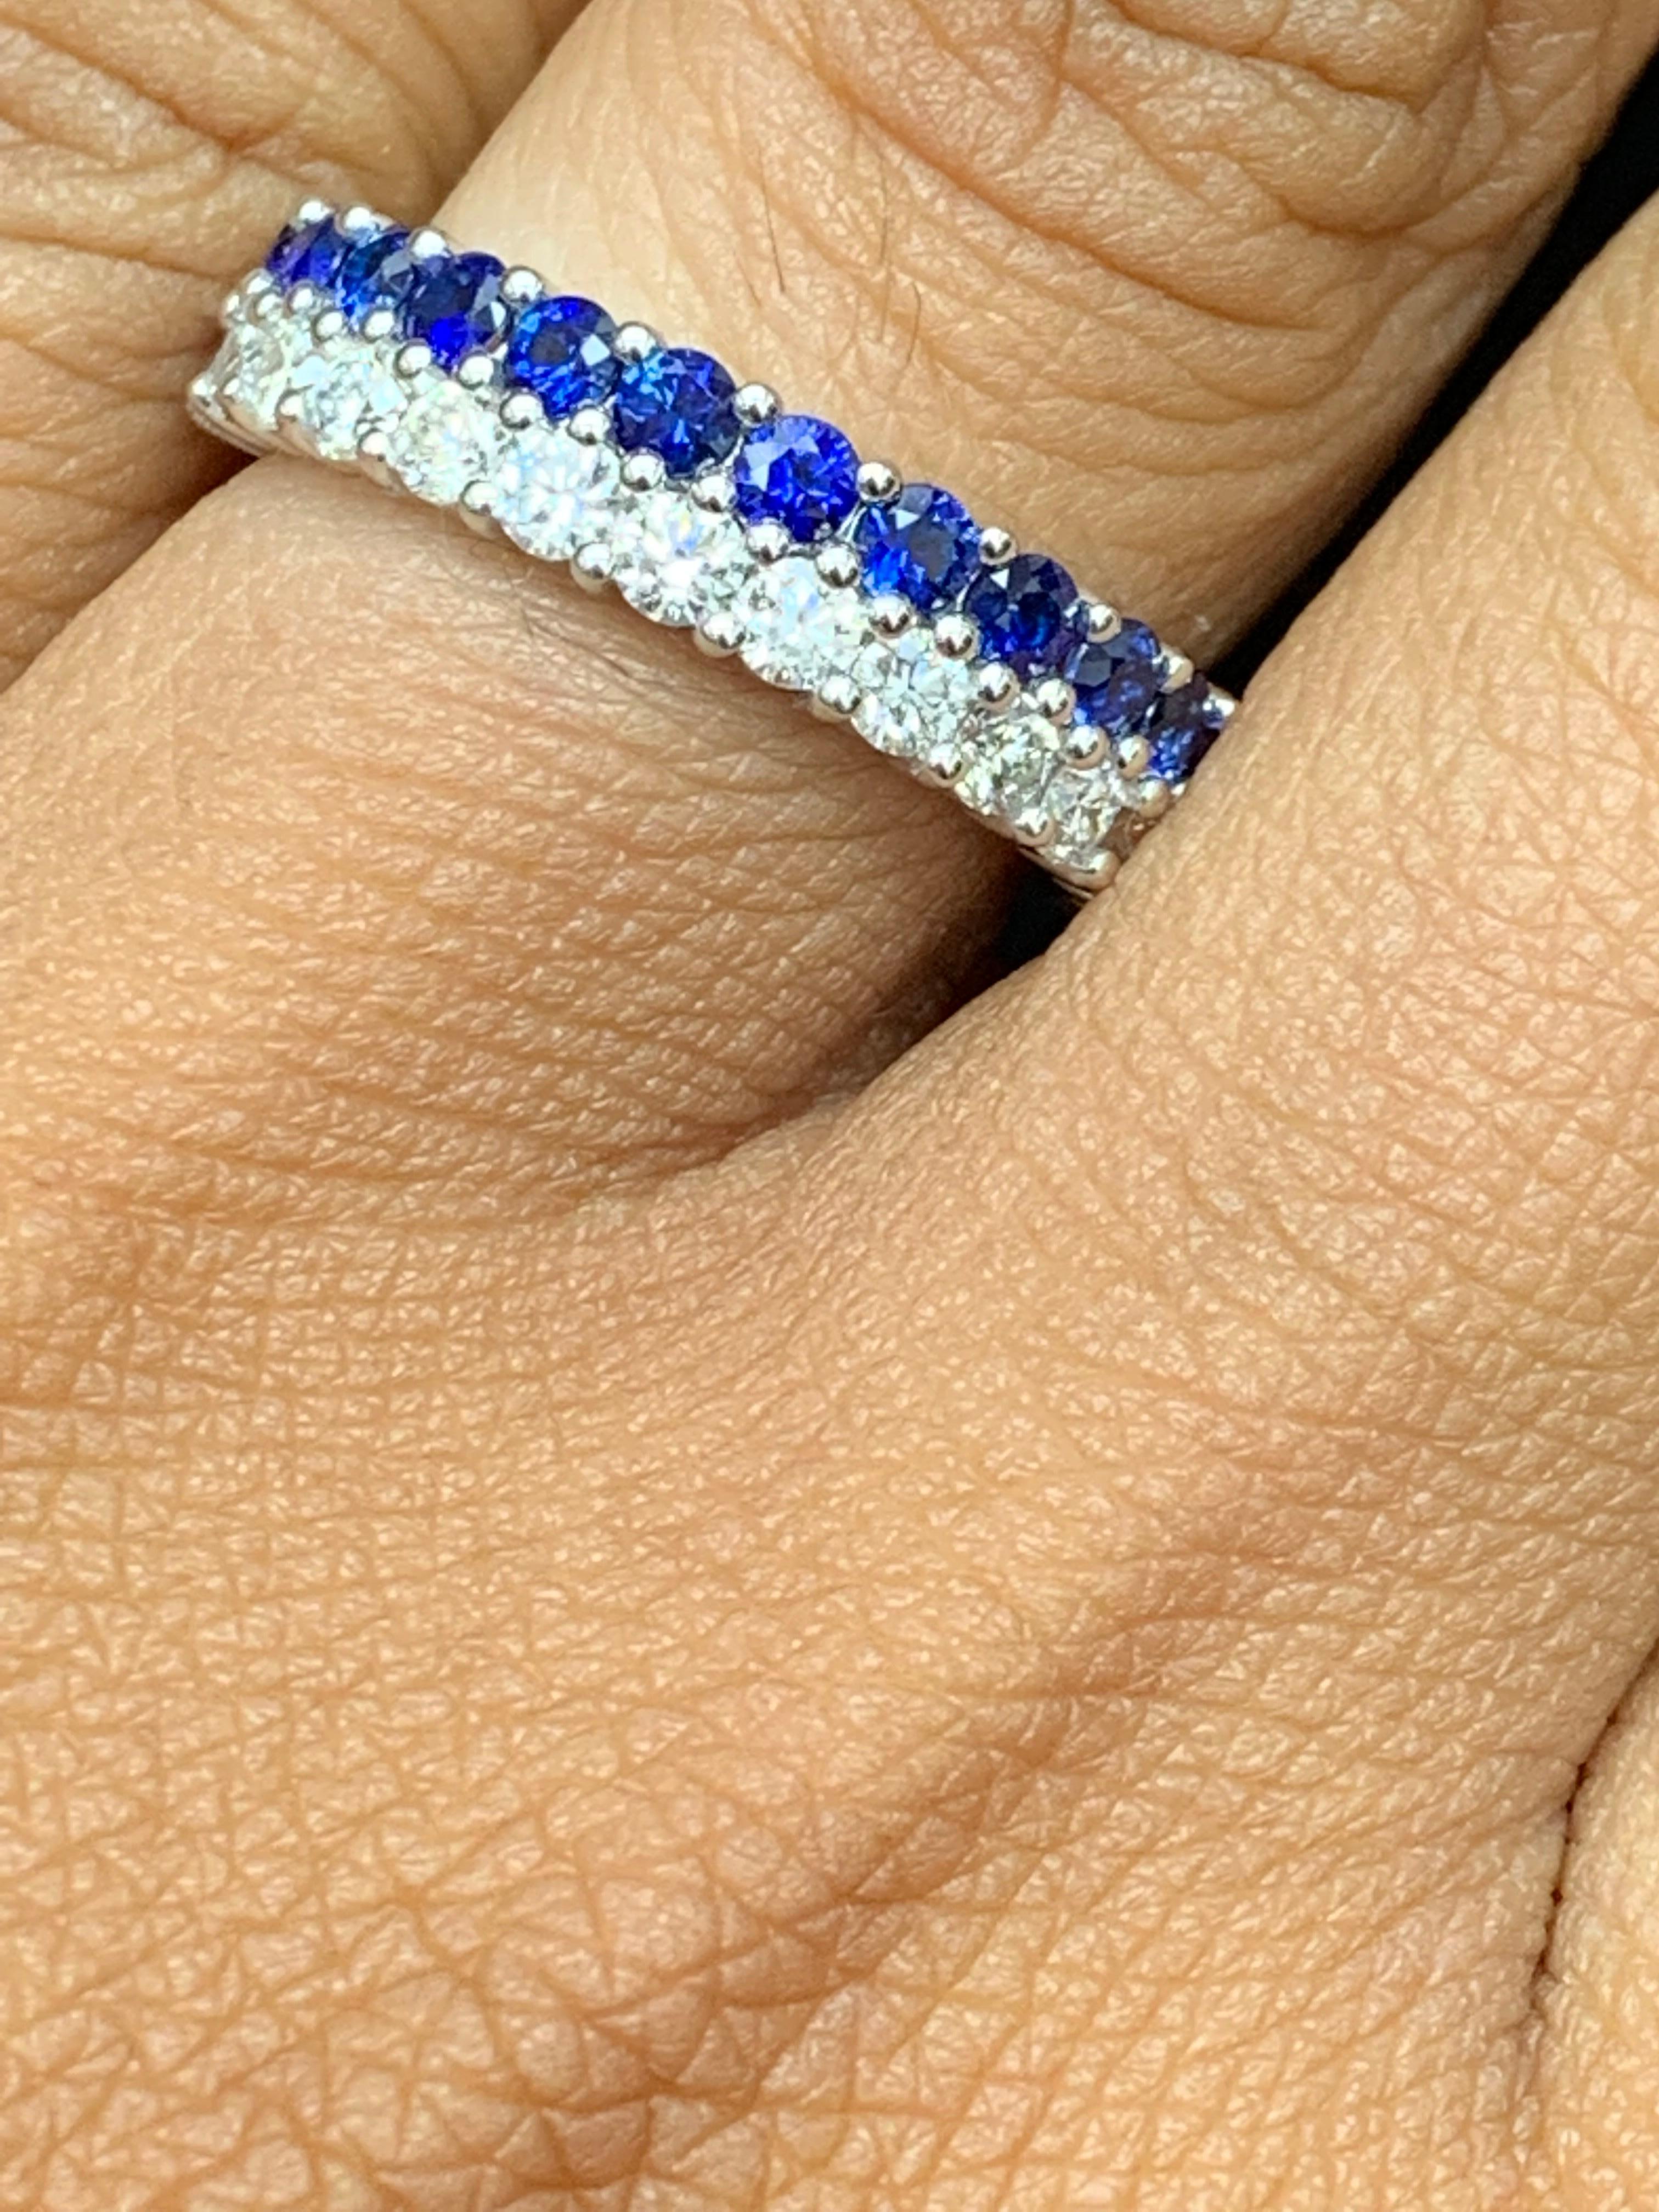 A unique and fashionable ring showcasing two rows of round-shape 13 blue sapphires and 14 diamonds, set in a band design. Emeralds weigh 0.80 carats and Diamonds weigh 0.70 carats total. A brilliant and masterfully-made piece.

Style available in